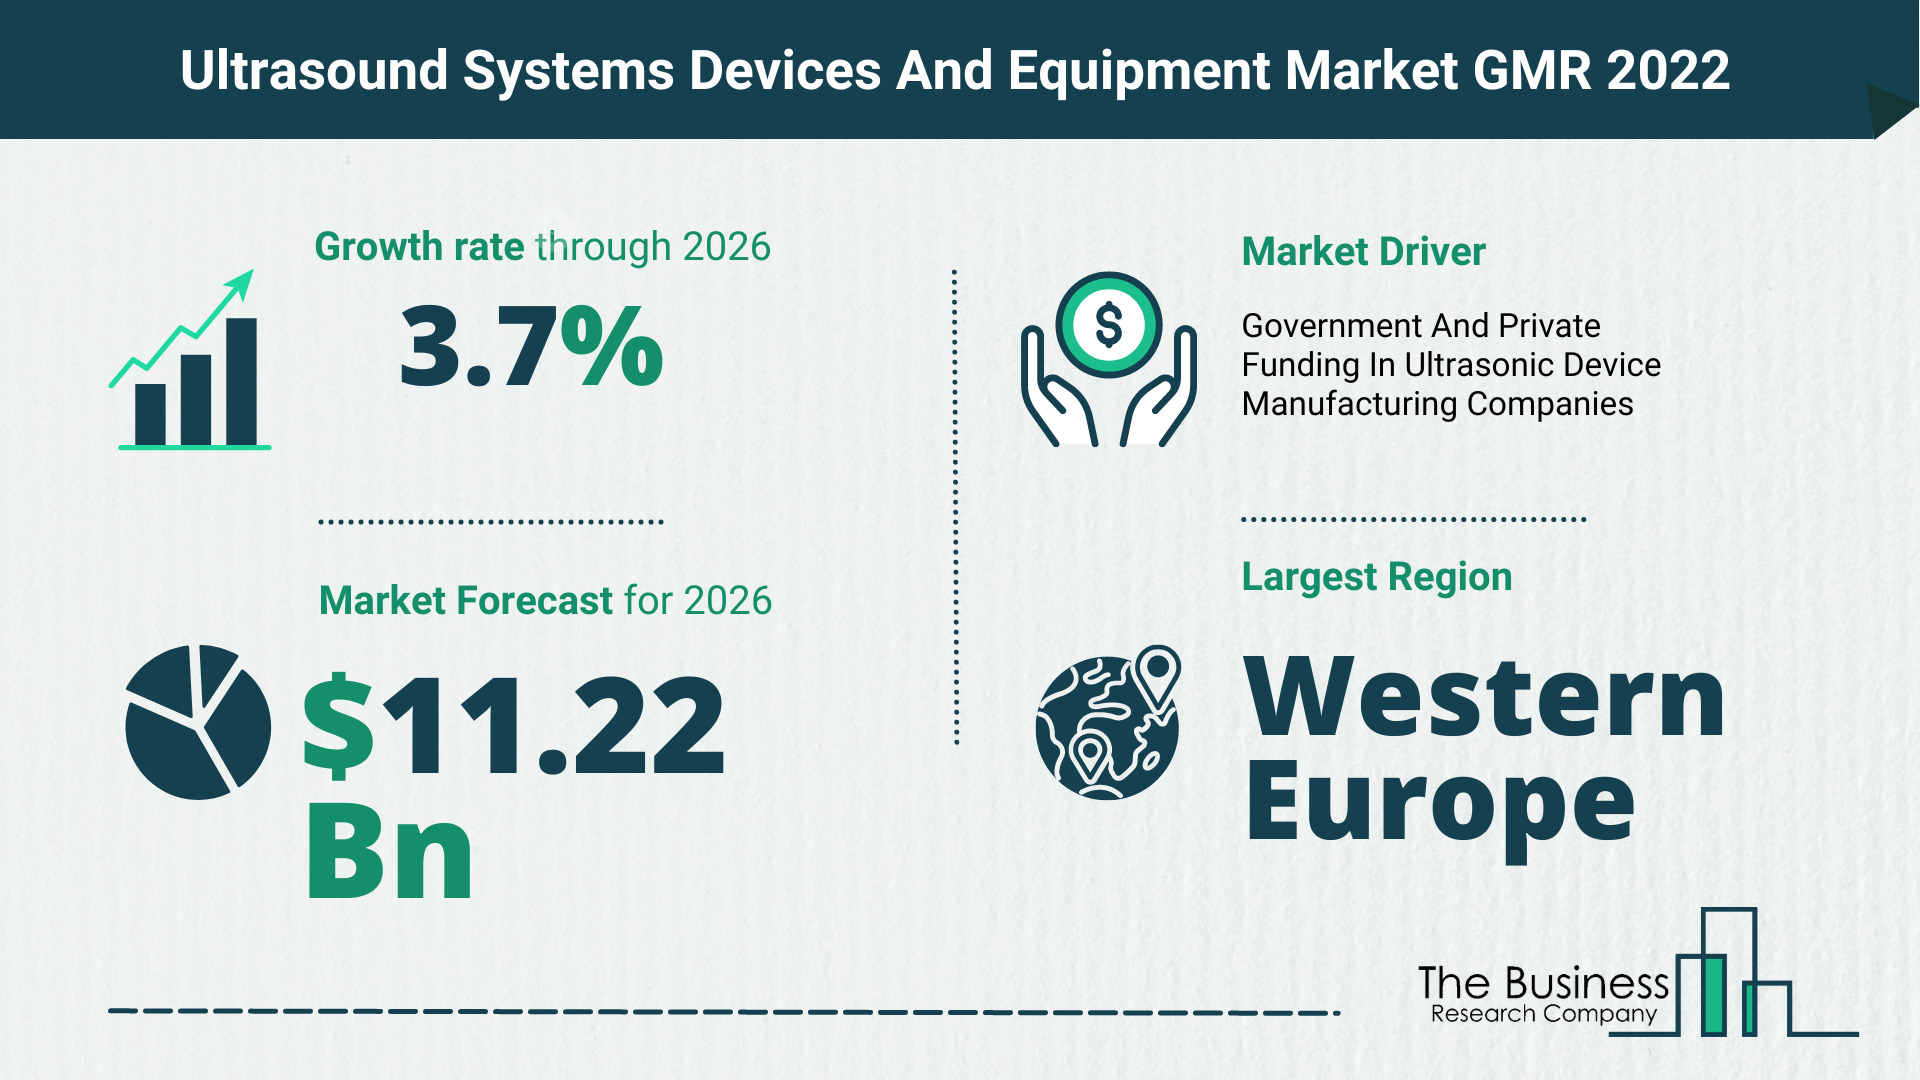 How Will The Ultrasound Systems Devices And Equipment Market Grow In 2022?